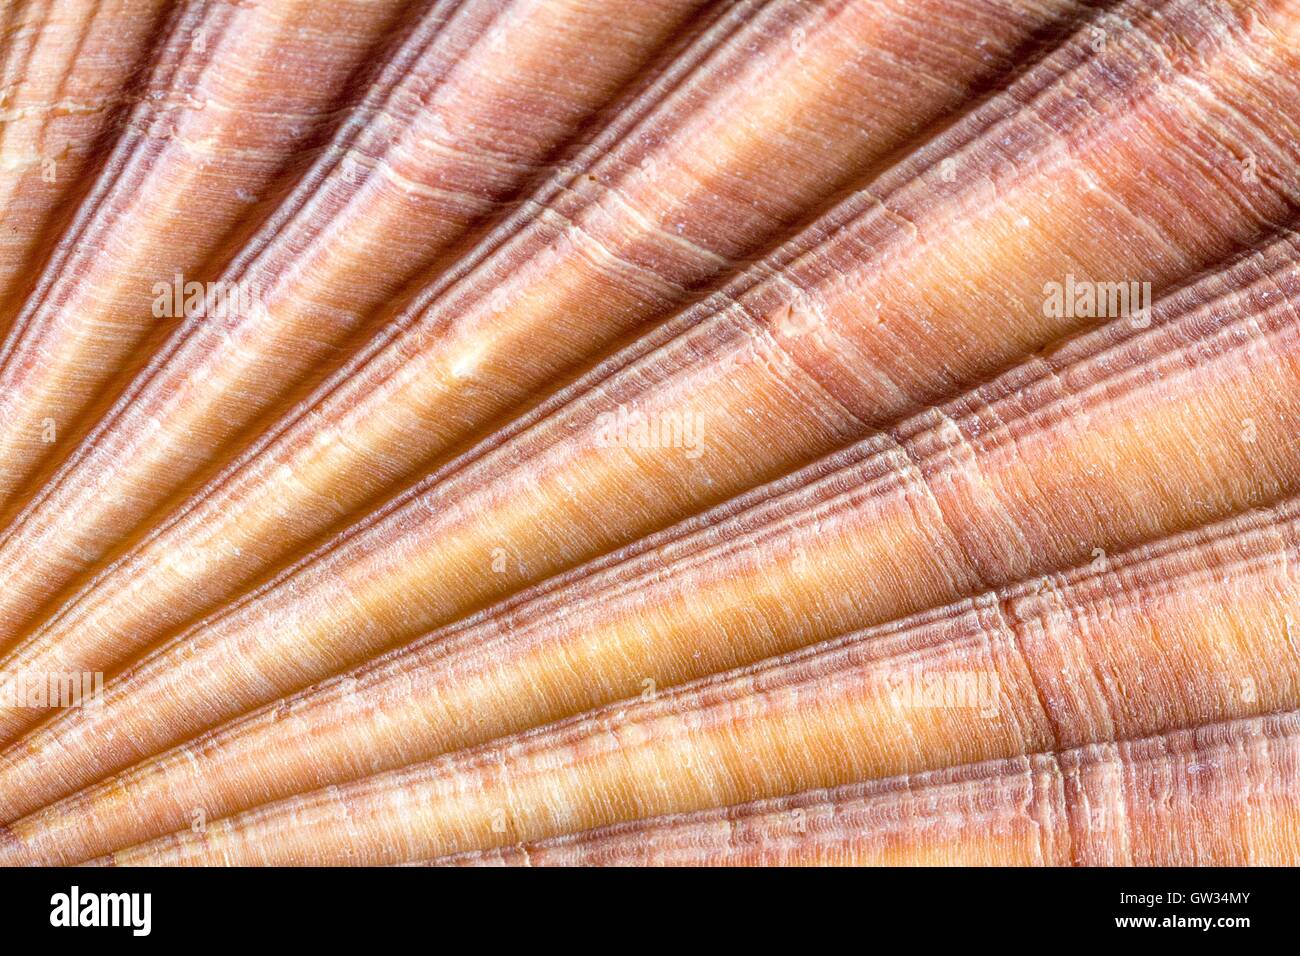 Red-ribbed scallop shell, macrophotograph. The shell of a red-ribbed scallop (Aequipecten glyptus), a marine bivalve mollusc. Shells of bivalve molluscs consist of two articulating parts, or valves. Horizontal object size of this image section: 15 mm. Stock Photo